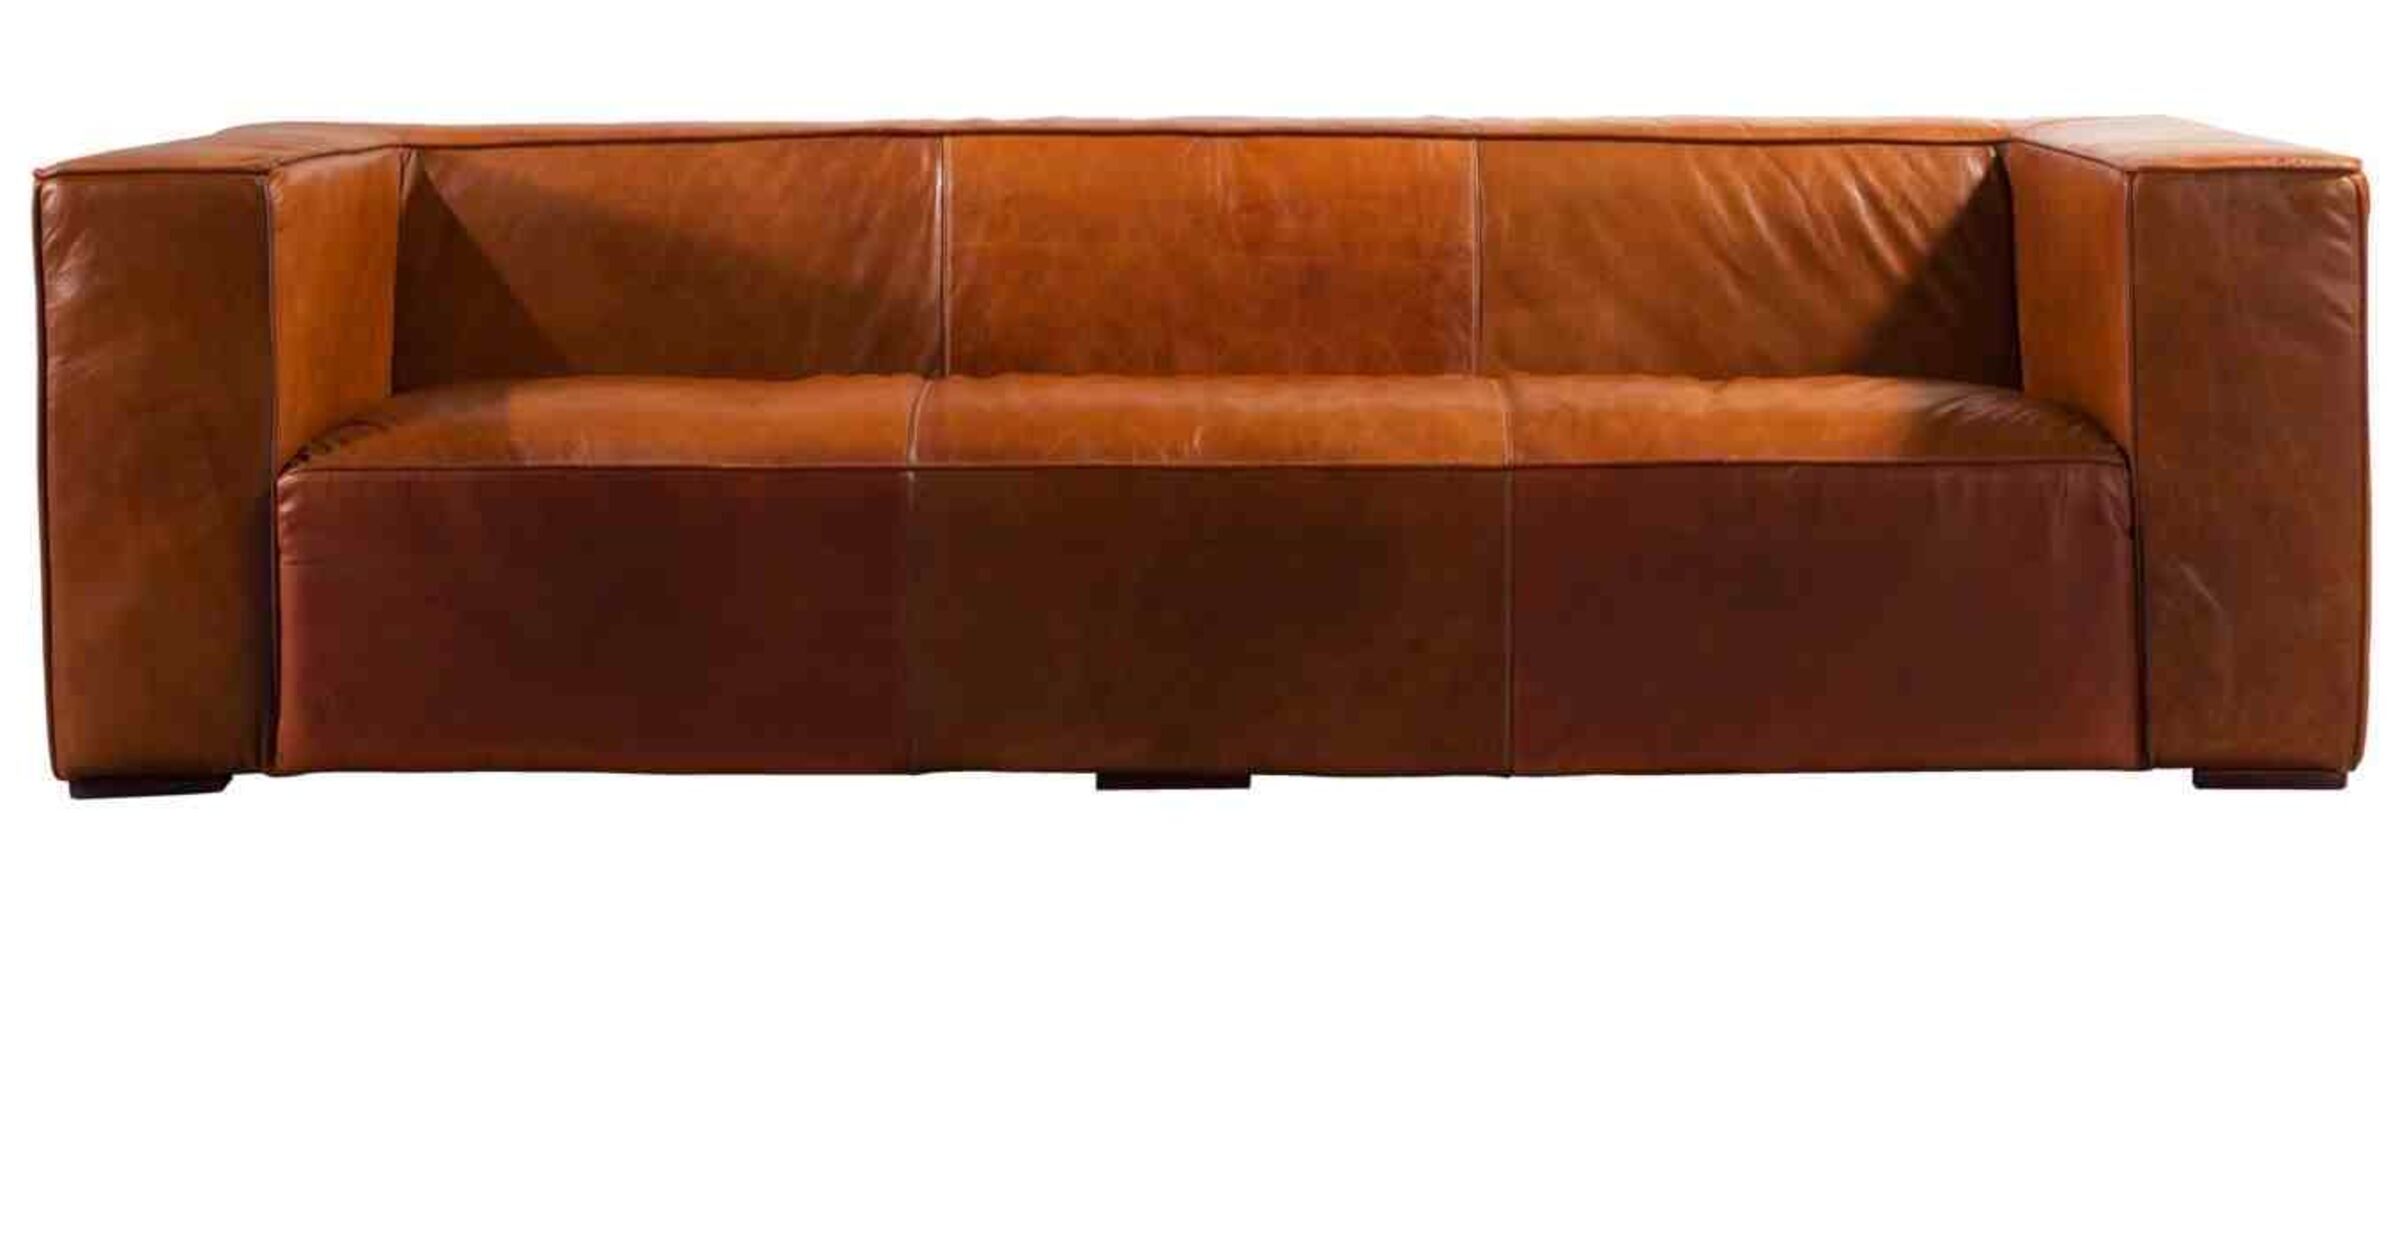 raph lauren home collection distressed leather sofa chairs